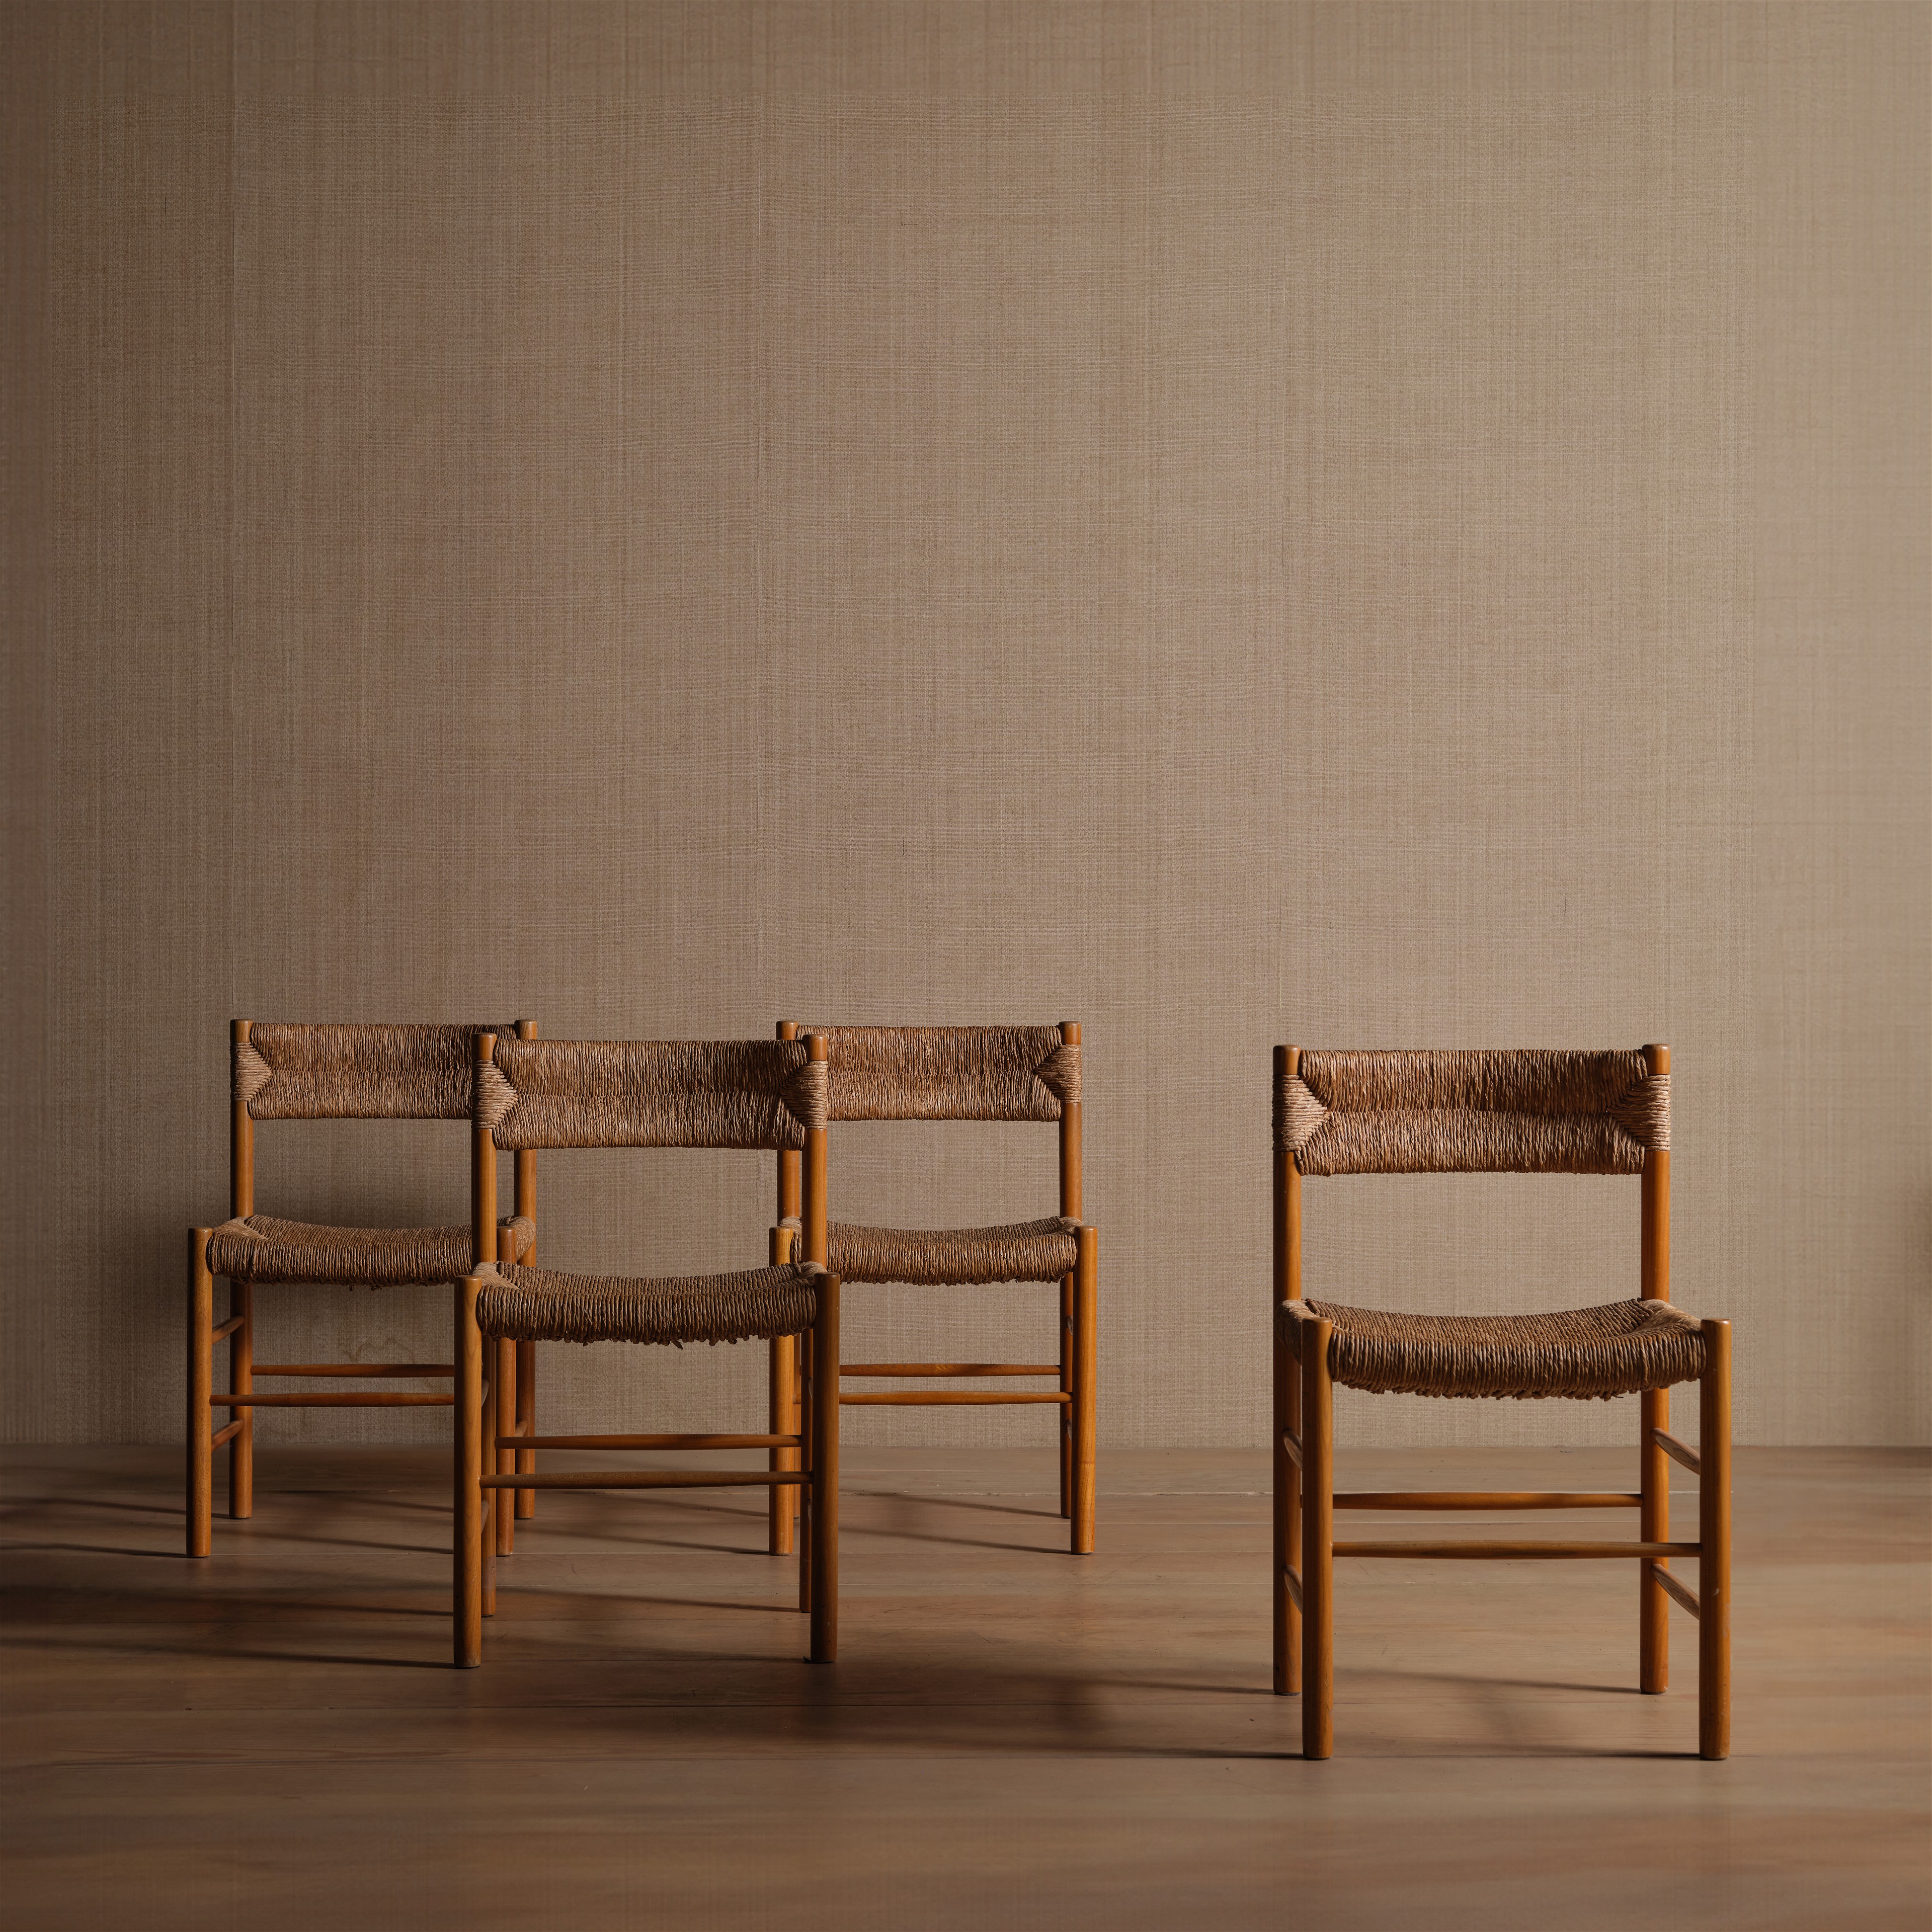 a set of four chairs sitting on top of a hard wood floor